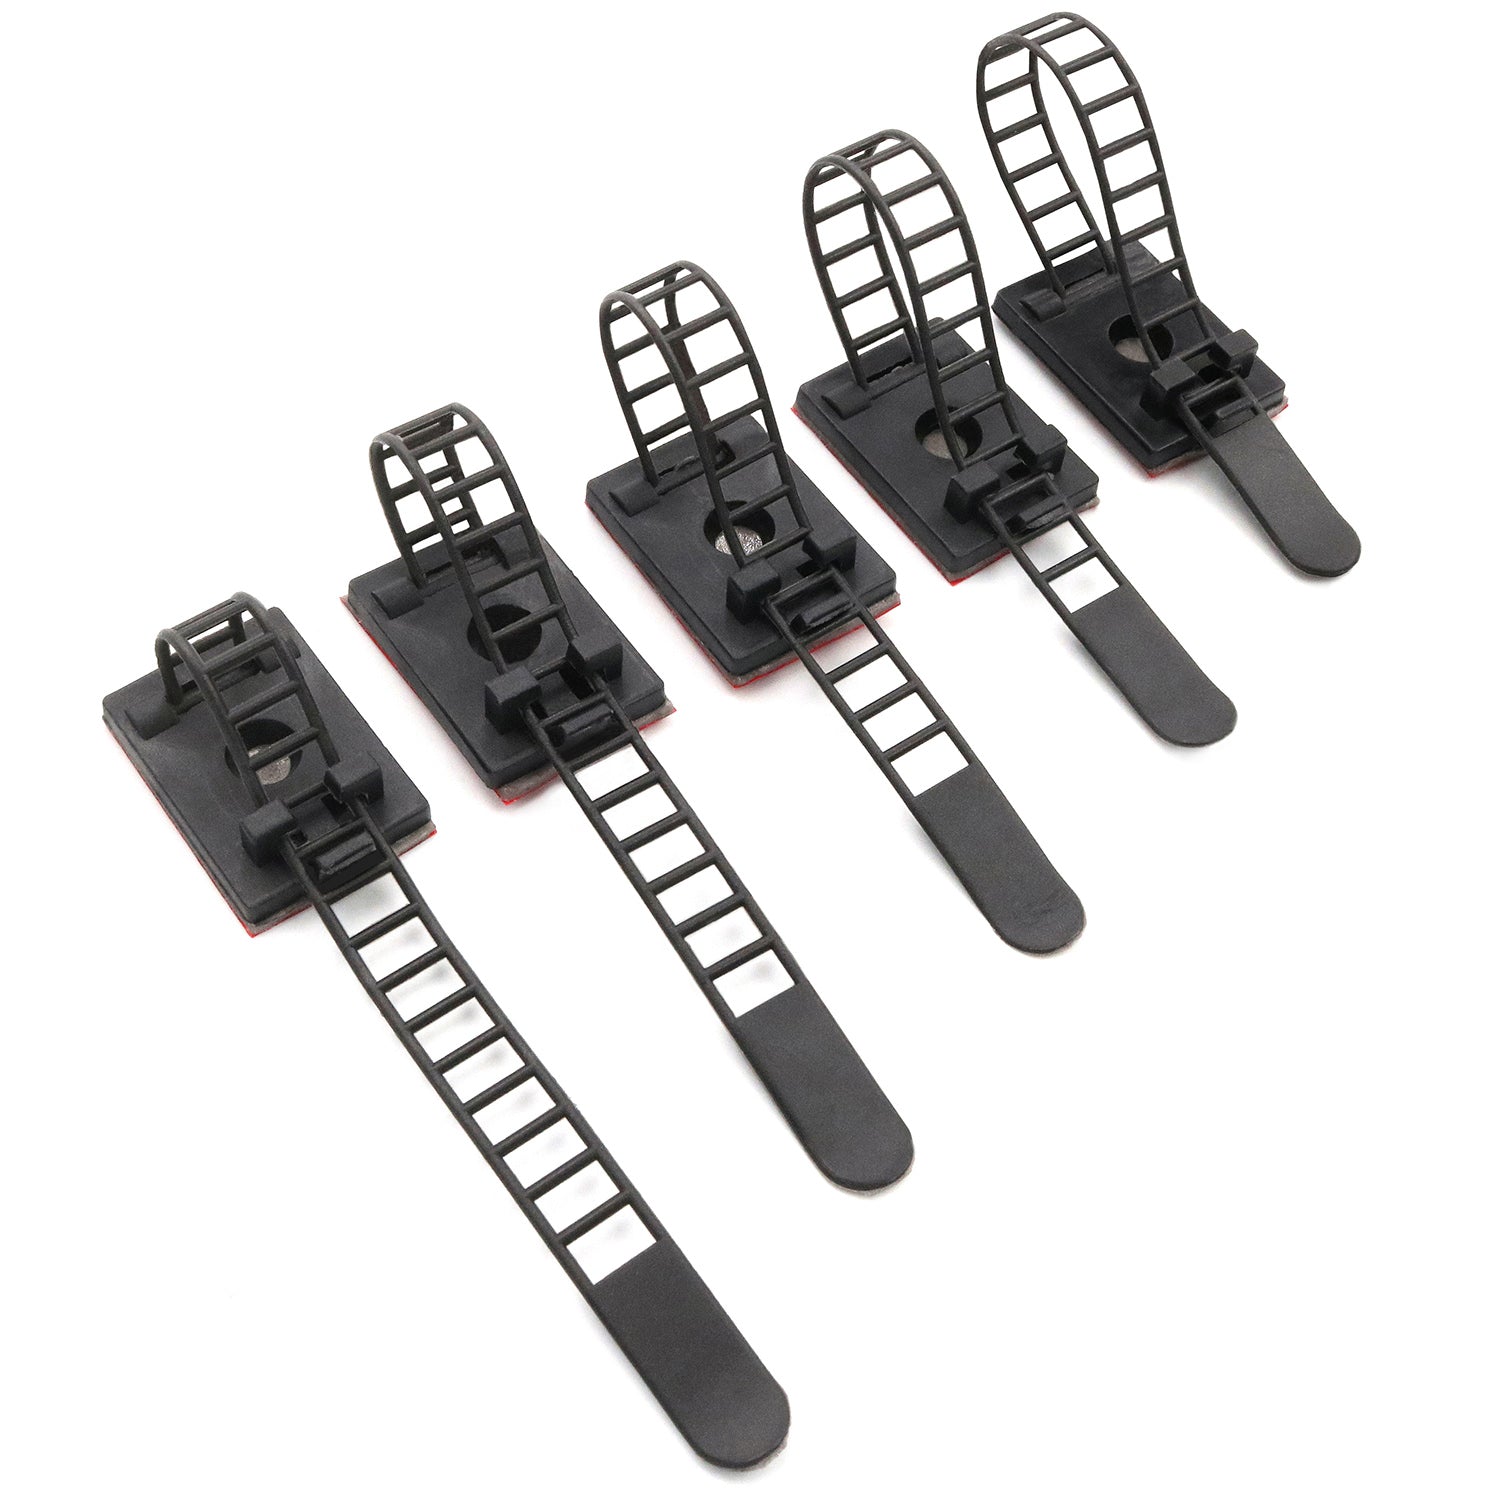 Large Adjustable Cable Clips (31mm x 21mm) - 60 Pack Bundled with 10 Bonus Reusable Cable Ties